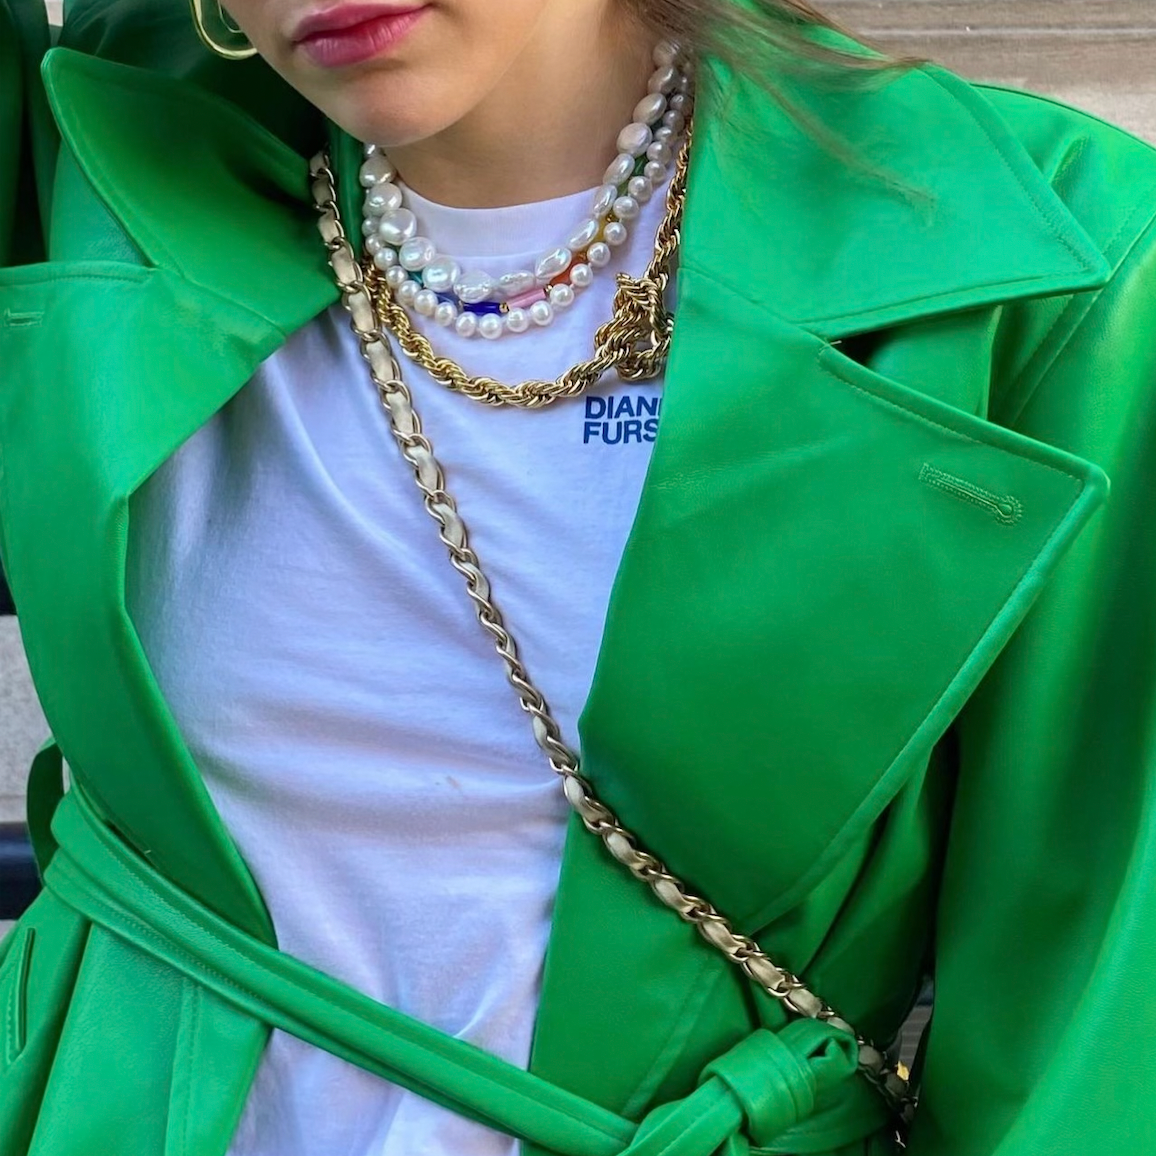 Green With Envy: How to Turn Heads in Green this St. Paddy's Day